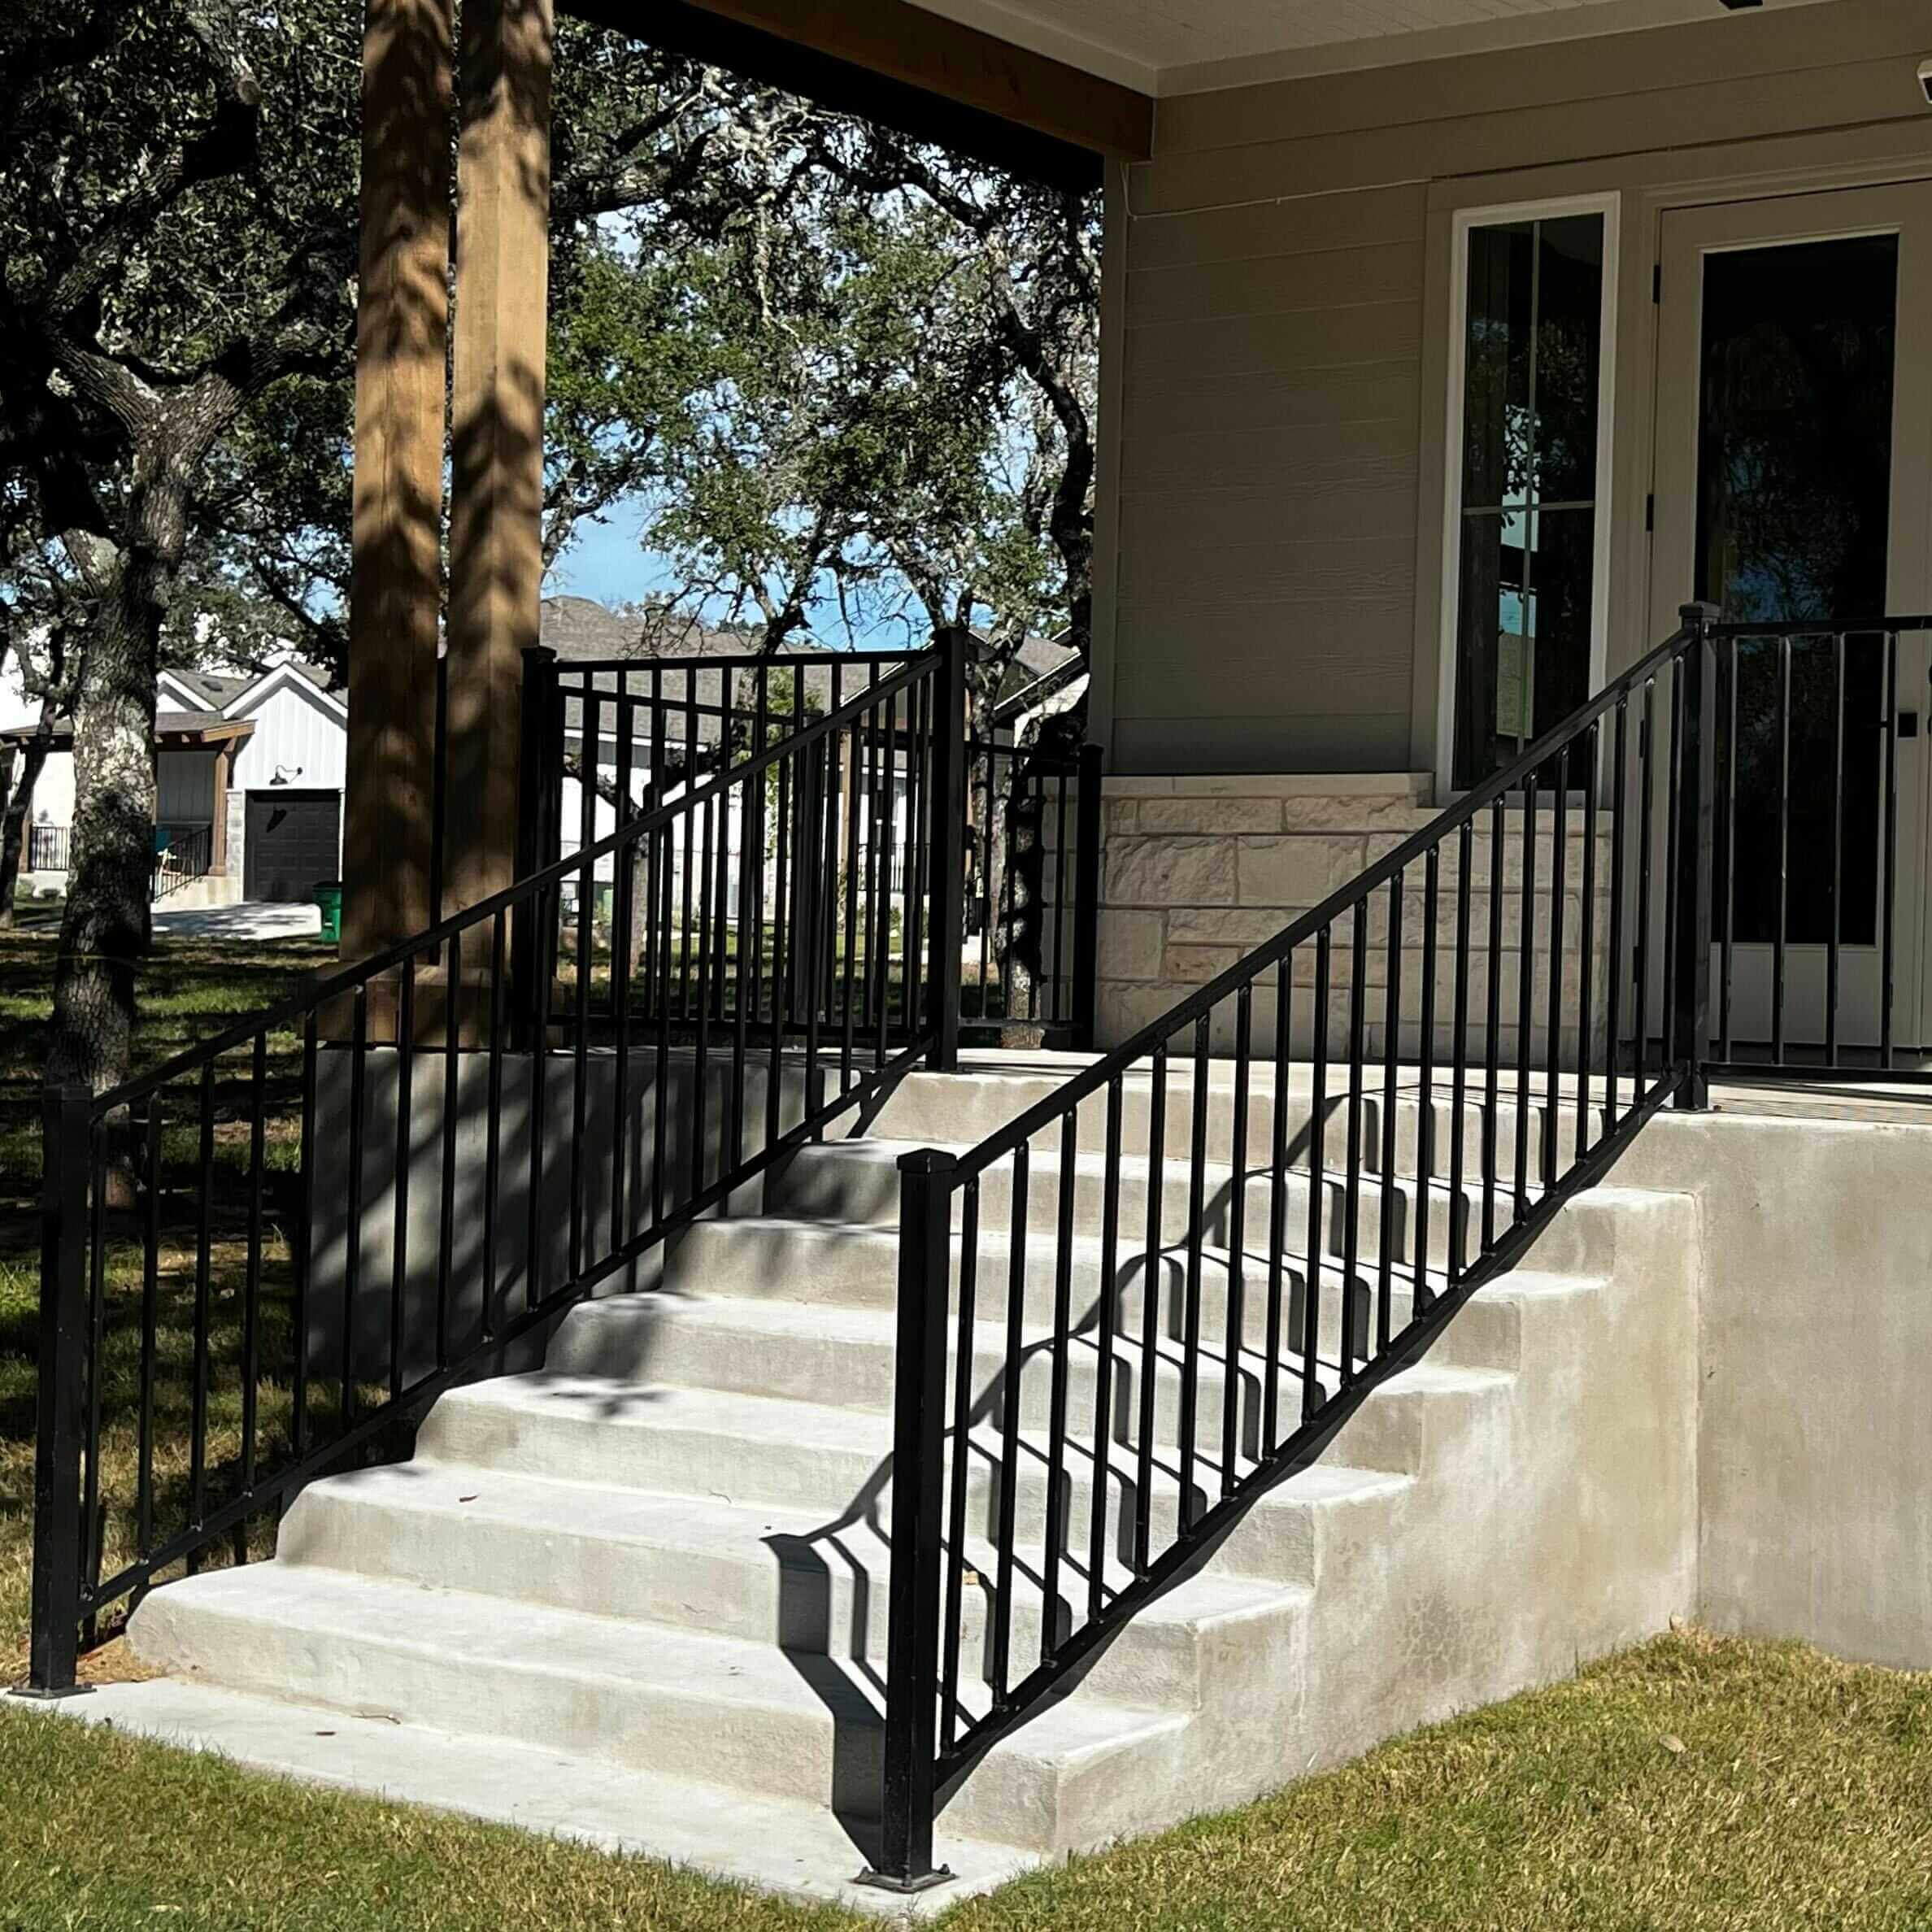 Black iron railing around front porch and down front steps